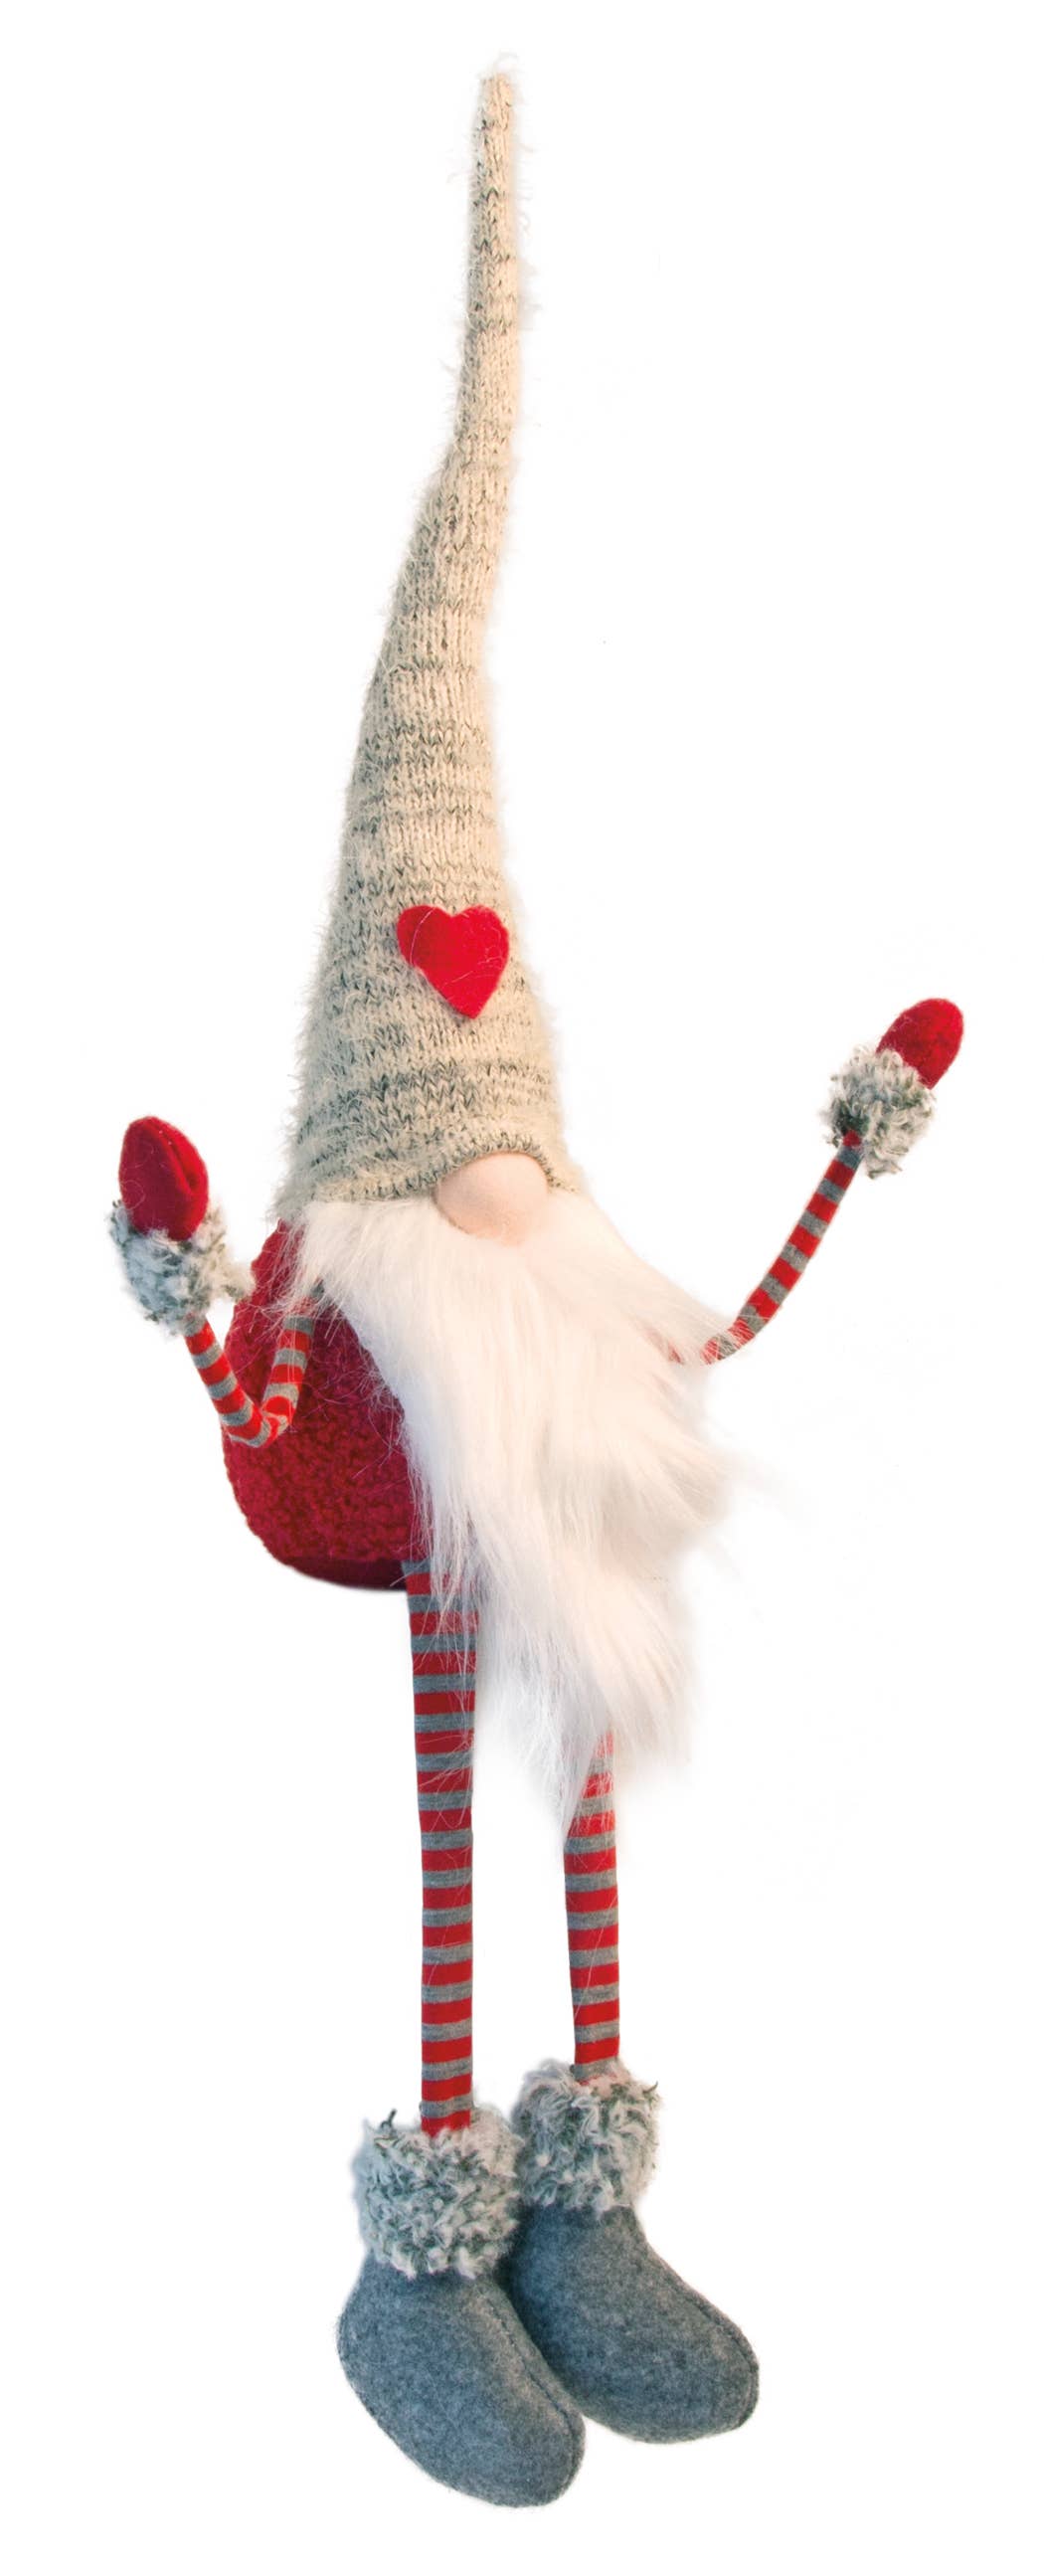 Tibbles Dangling Legs Gnome Christmas Accent